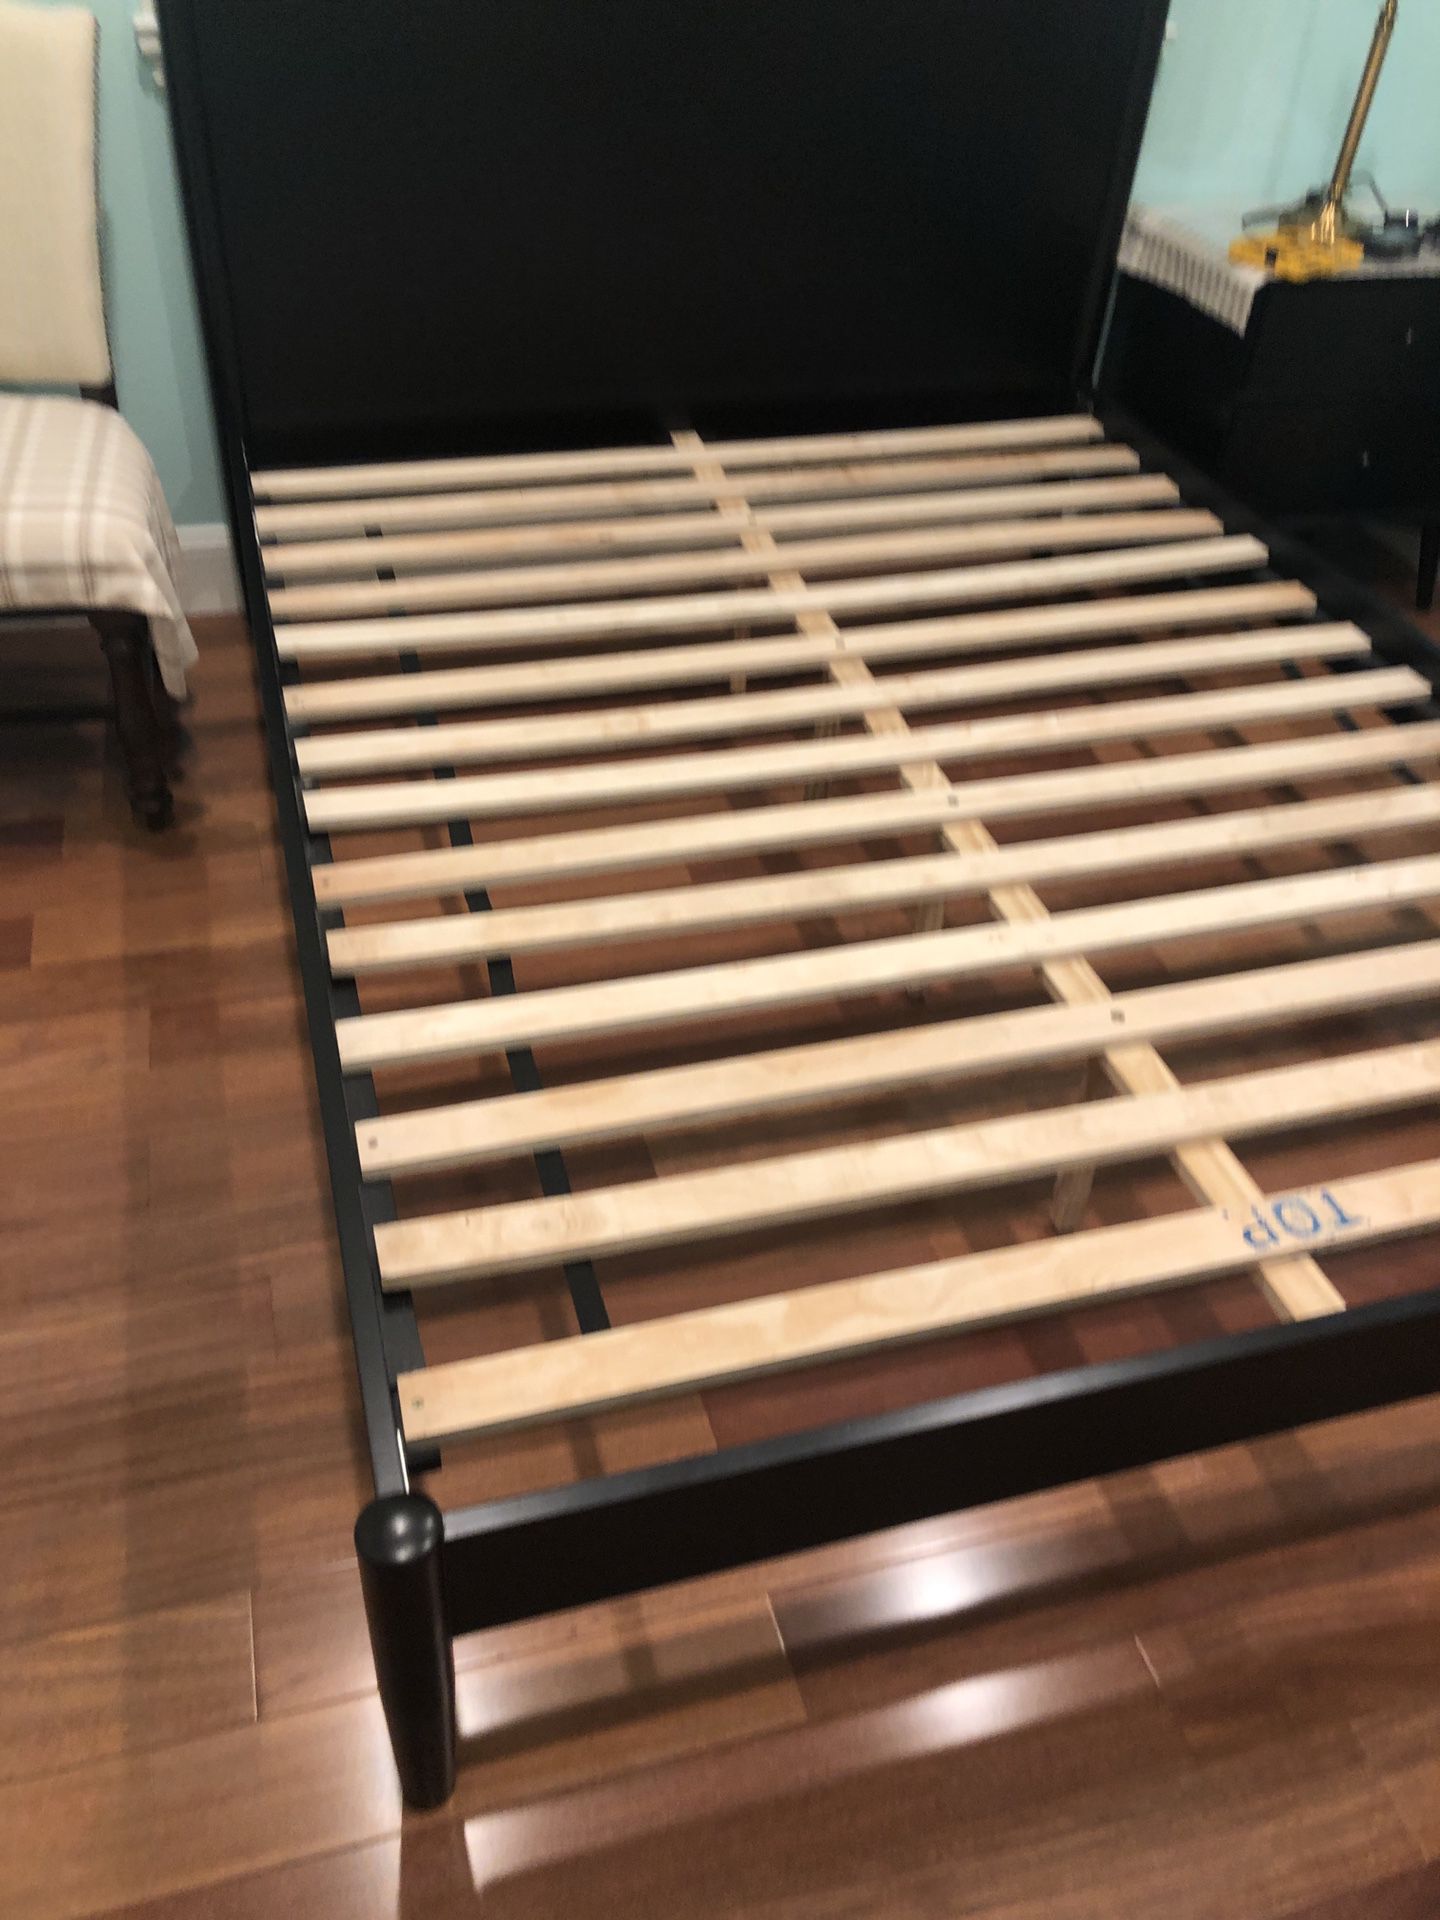 Queen size bed frame like new